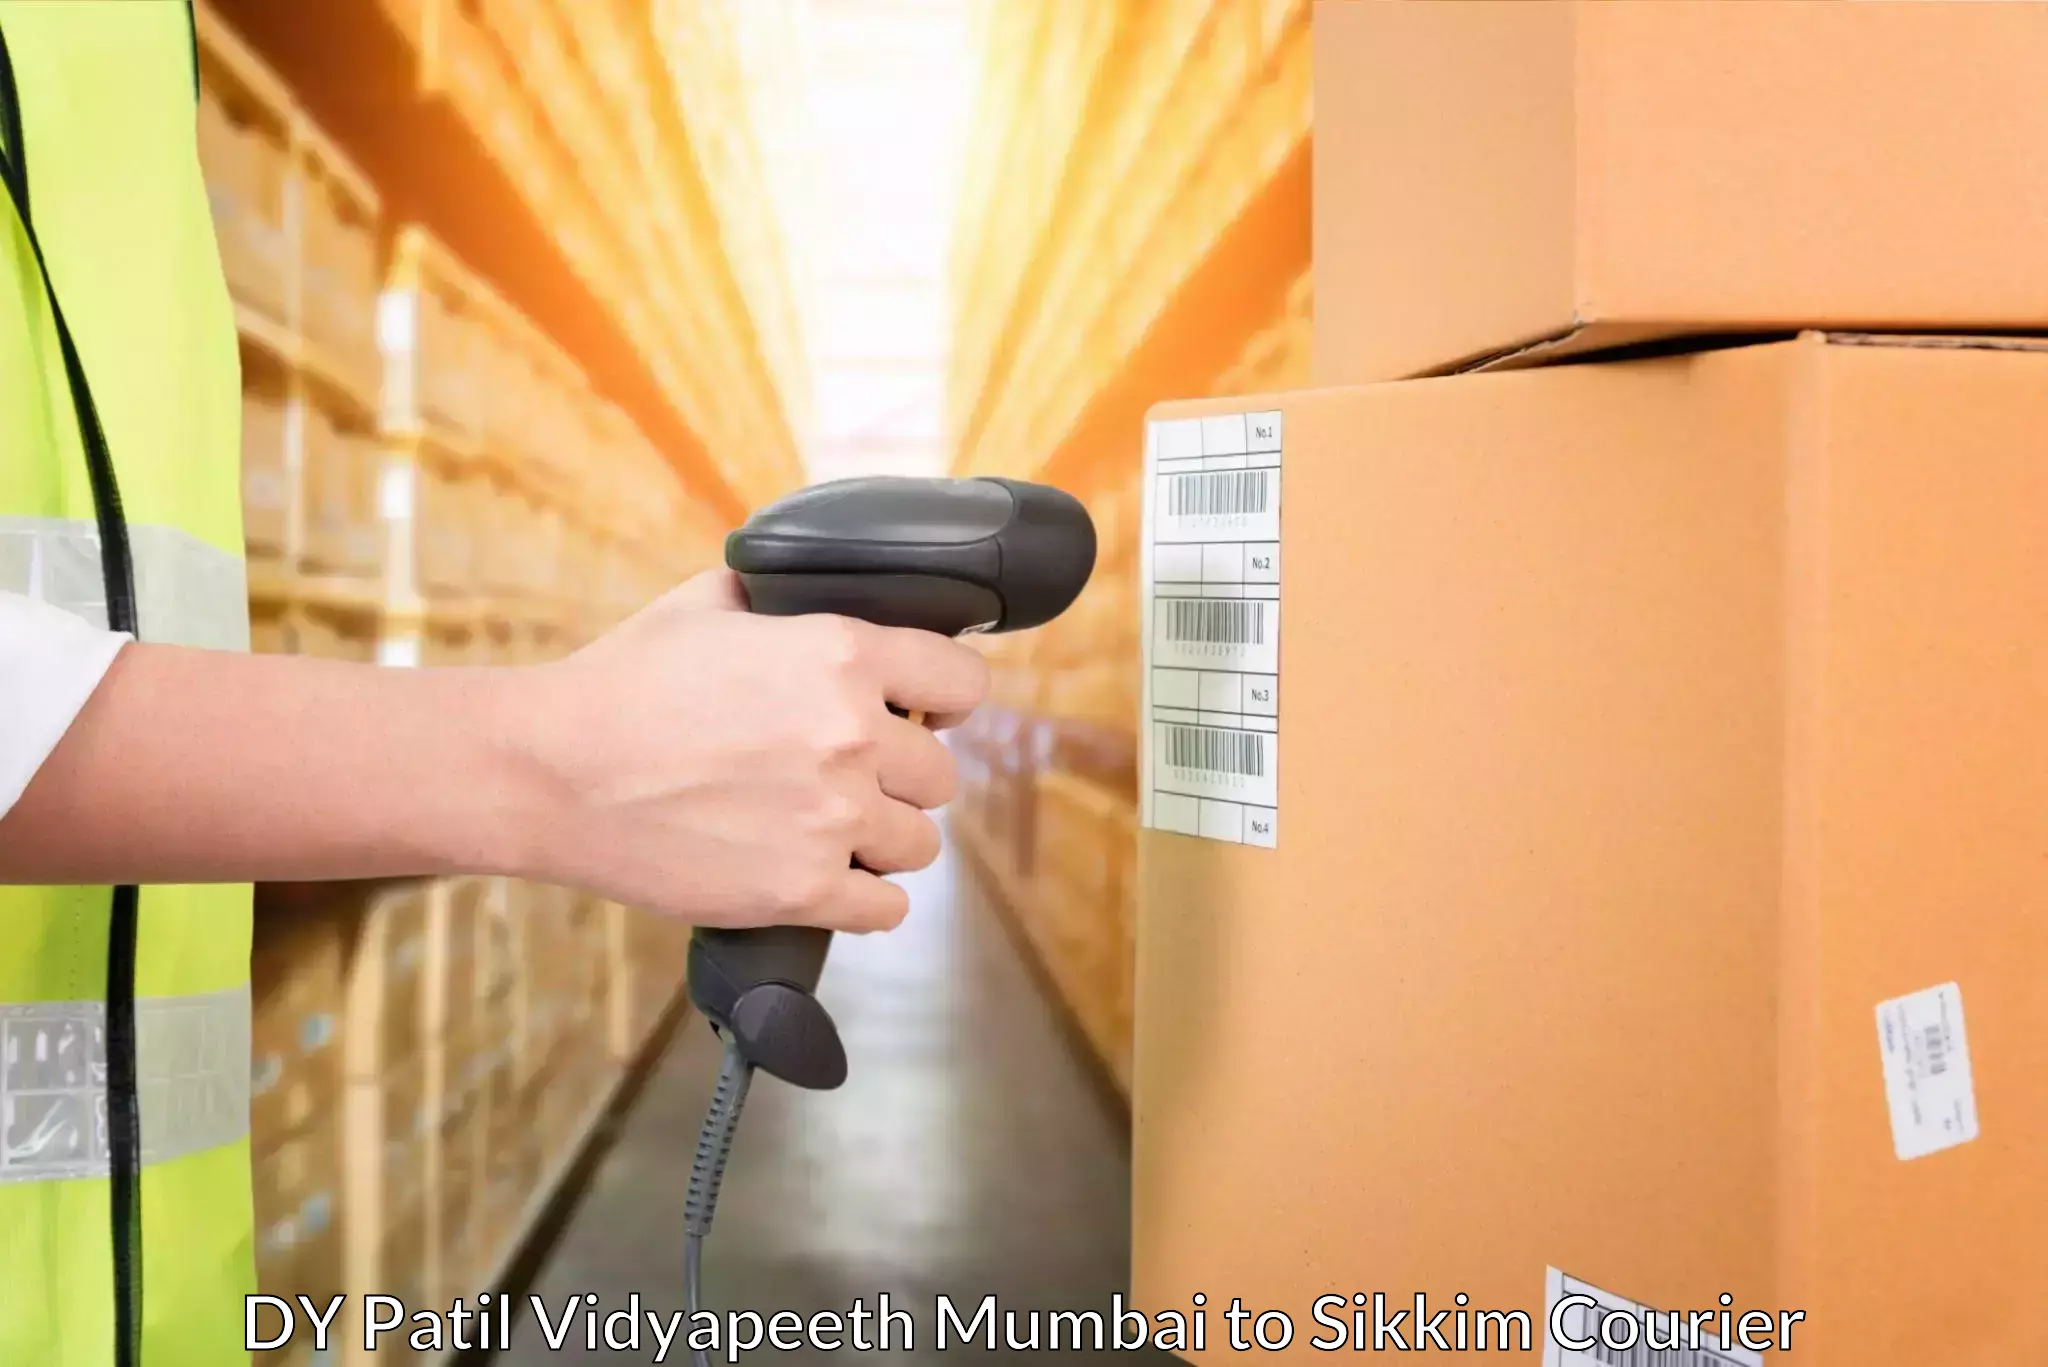 Reliable shipping solutions DY Patil Vidyapeeth Mumbai to Sikkim